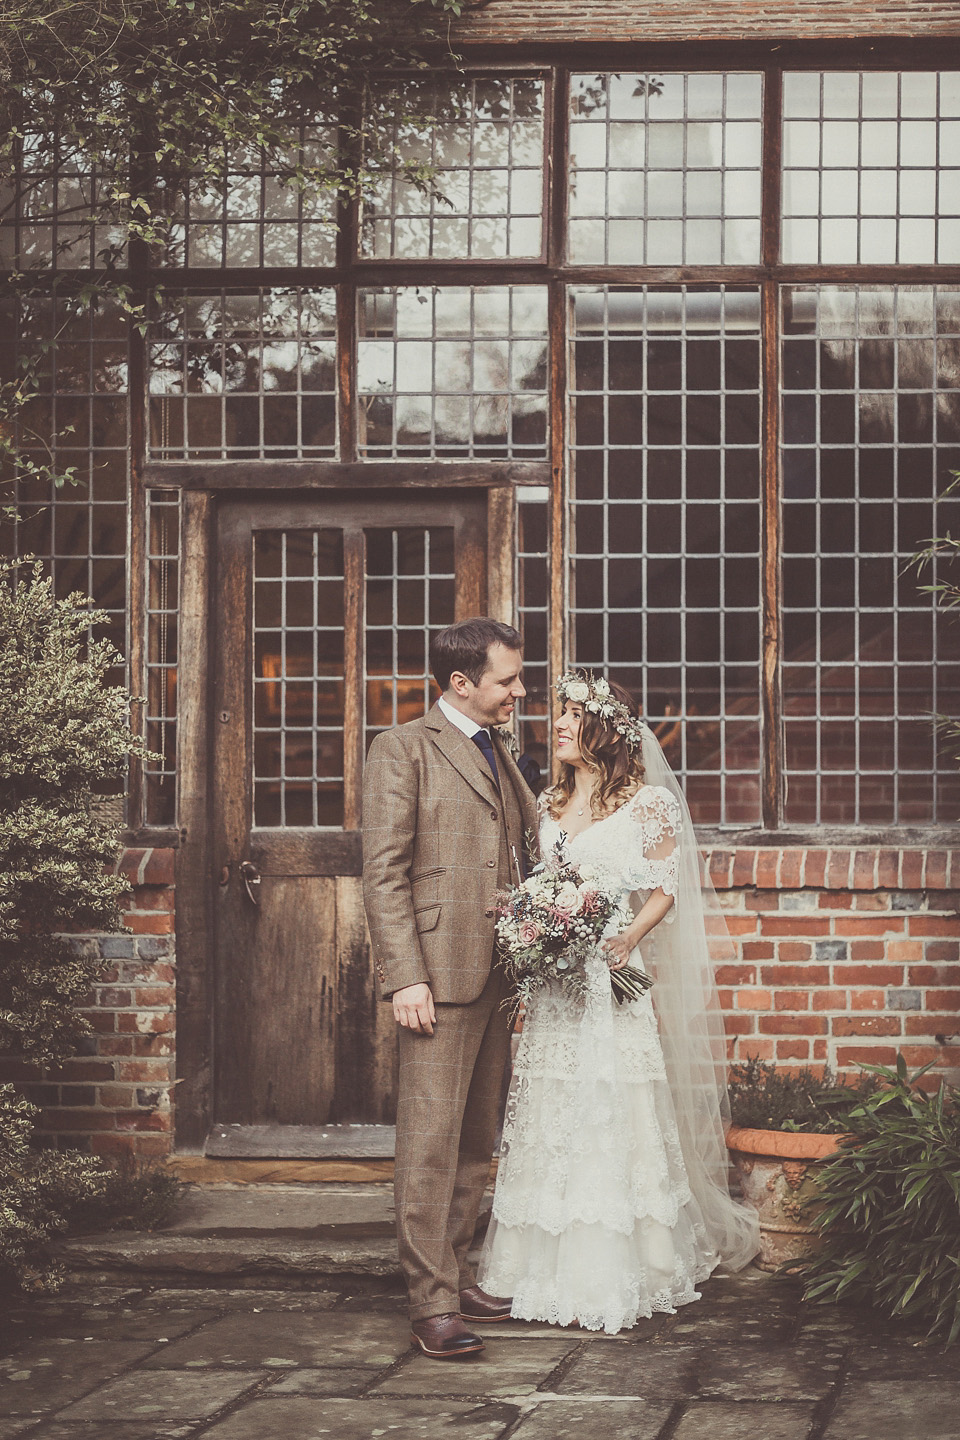 The bride wears YolanCris for her rustic, late Autumn barn wedding at Ramster Hall in Chiddingford, Surrey. Photography by Michelle Lindsell.